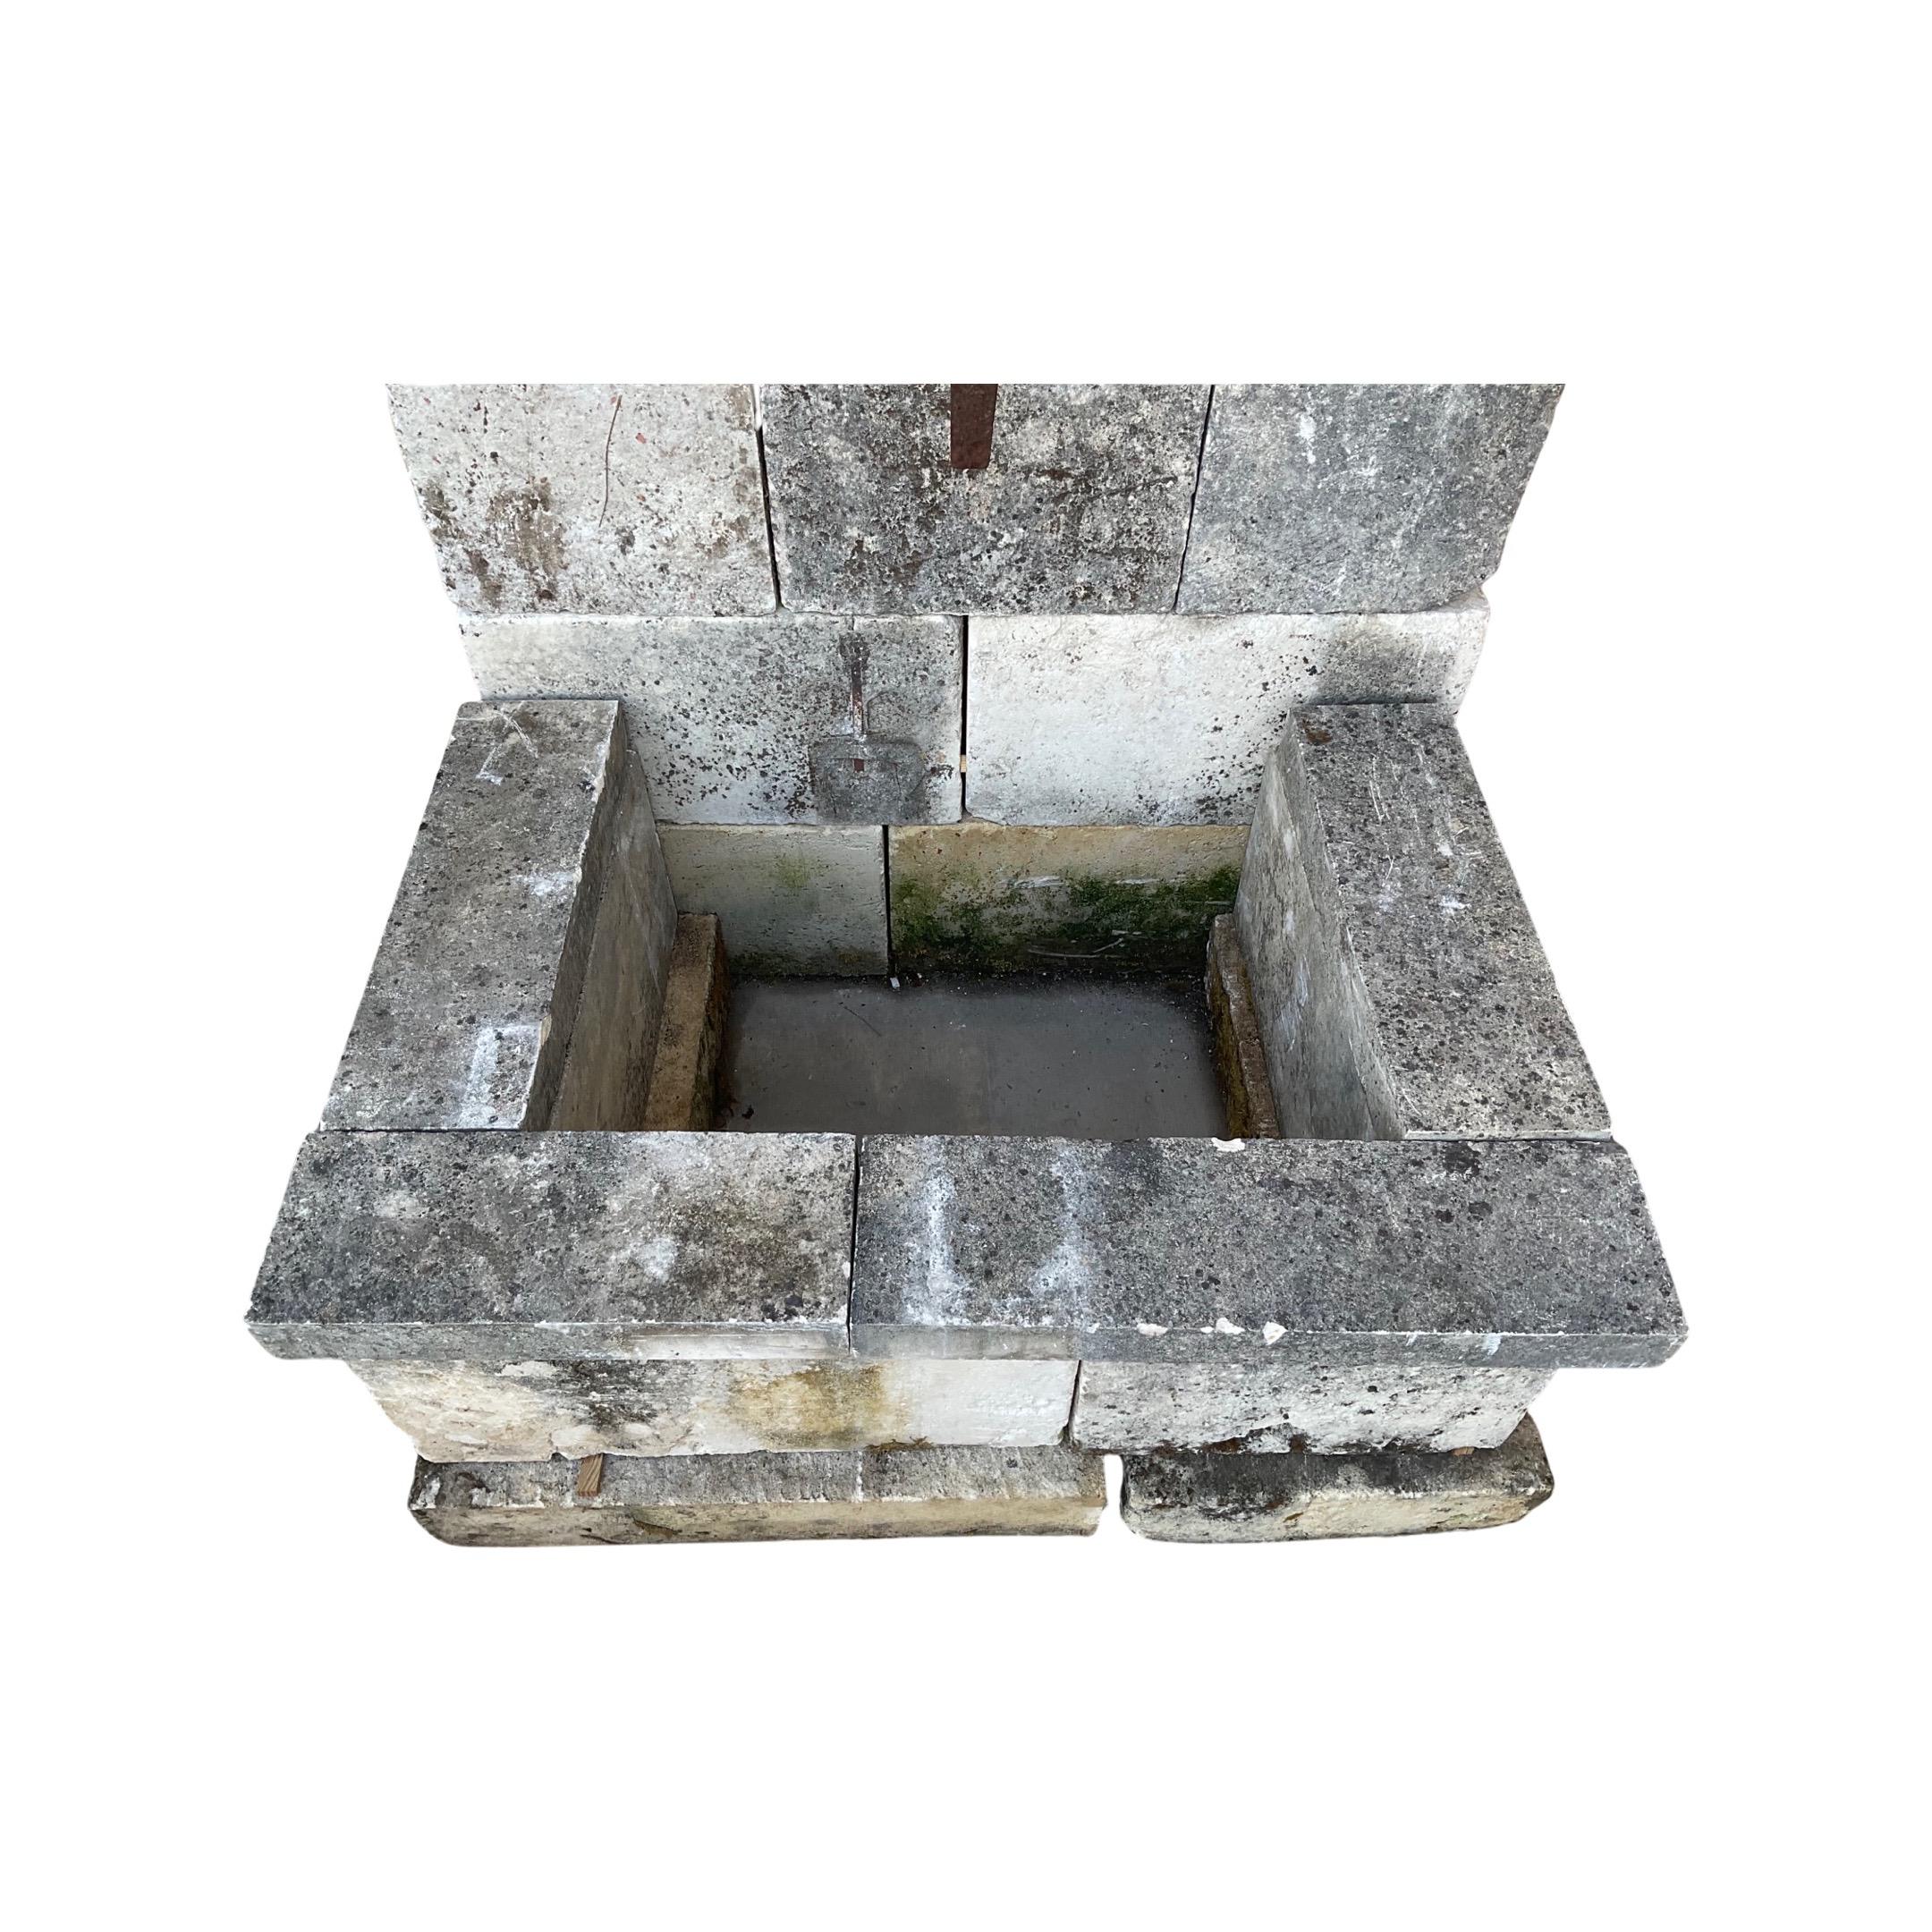 This rustic, antique French Limestone Fountain from 1890 is an architectural treasure. It adds substantial style to any outdoor space, creating an atmosphere of timeless elegance. Crafted of durable limestone and featuring intricate carvings, this